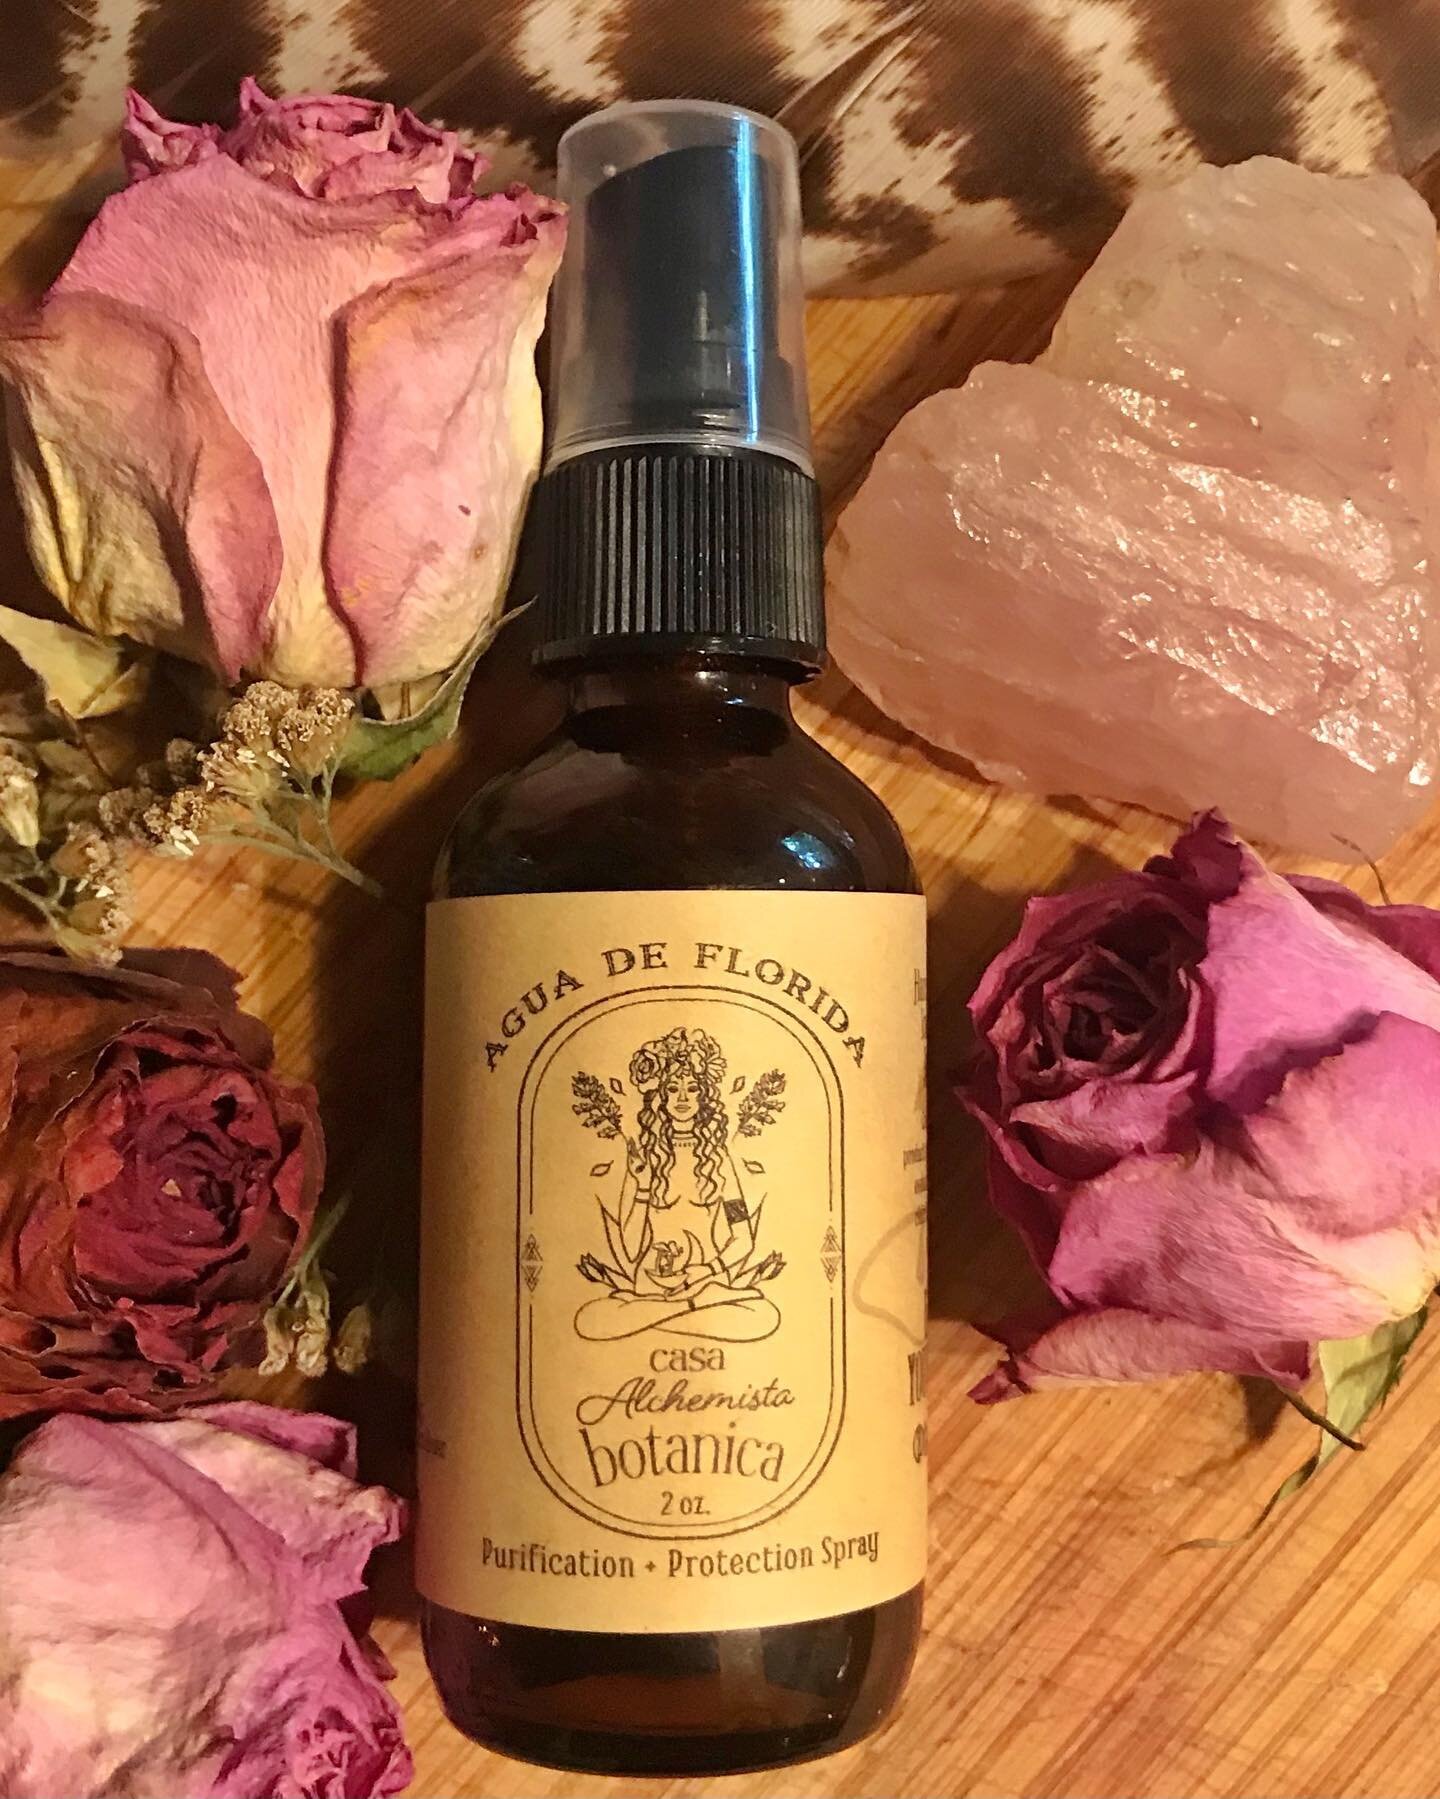 A͙G͙U͙A͙ &nbsp;D͙E͙&nbsp; F͙L͙O͙R͙I͙D͙A͙ just added to the shop! 
🌙🌹🪶
Agua de Florida (Spanish for Water of the Flowers) is a spirit water infused with flowers, herbs, citrus, and other ingredients used traditionally for cleansing during ceremony,